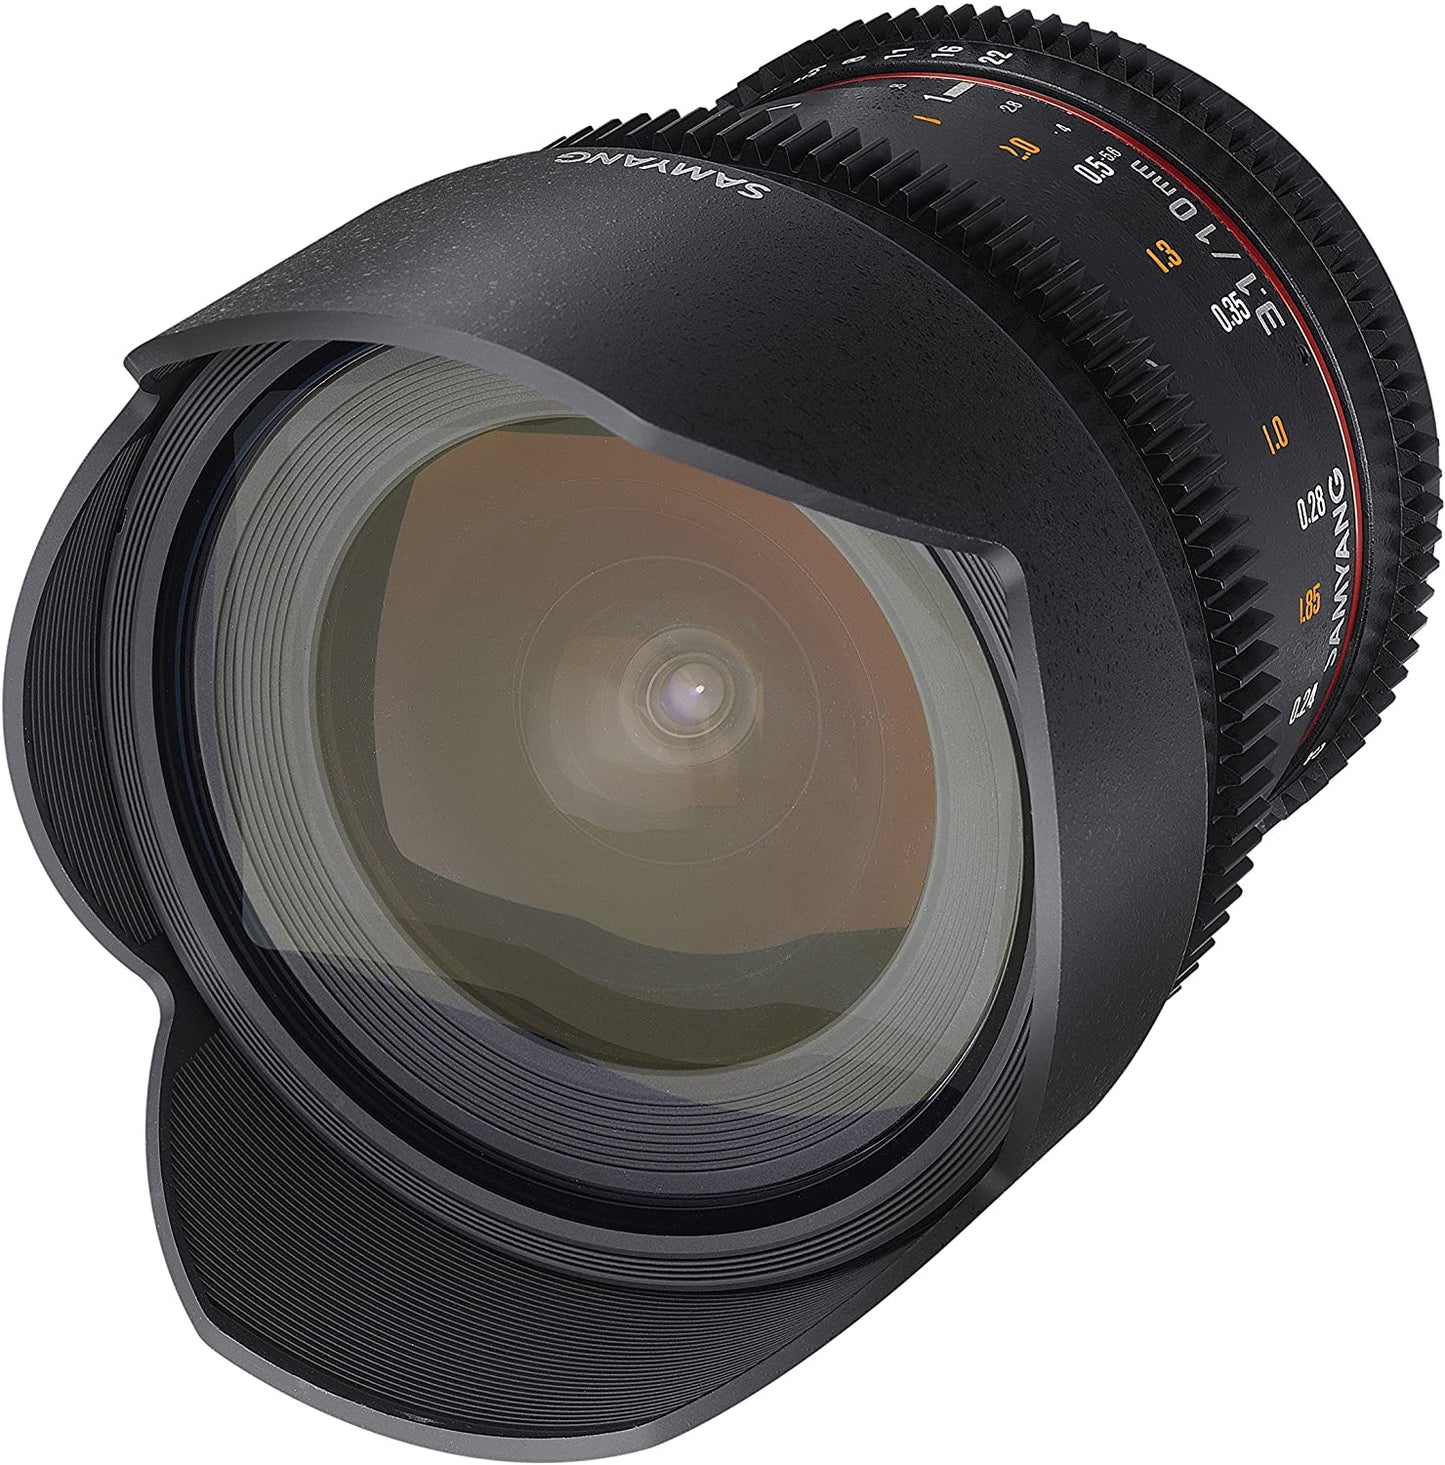 Samyang 10mm T3.1 Wide Angle Manual Focus Cine Lens (E-Mount) for Sony Mirrorless Cameras for Professional Cinema Videography and Filmmaking